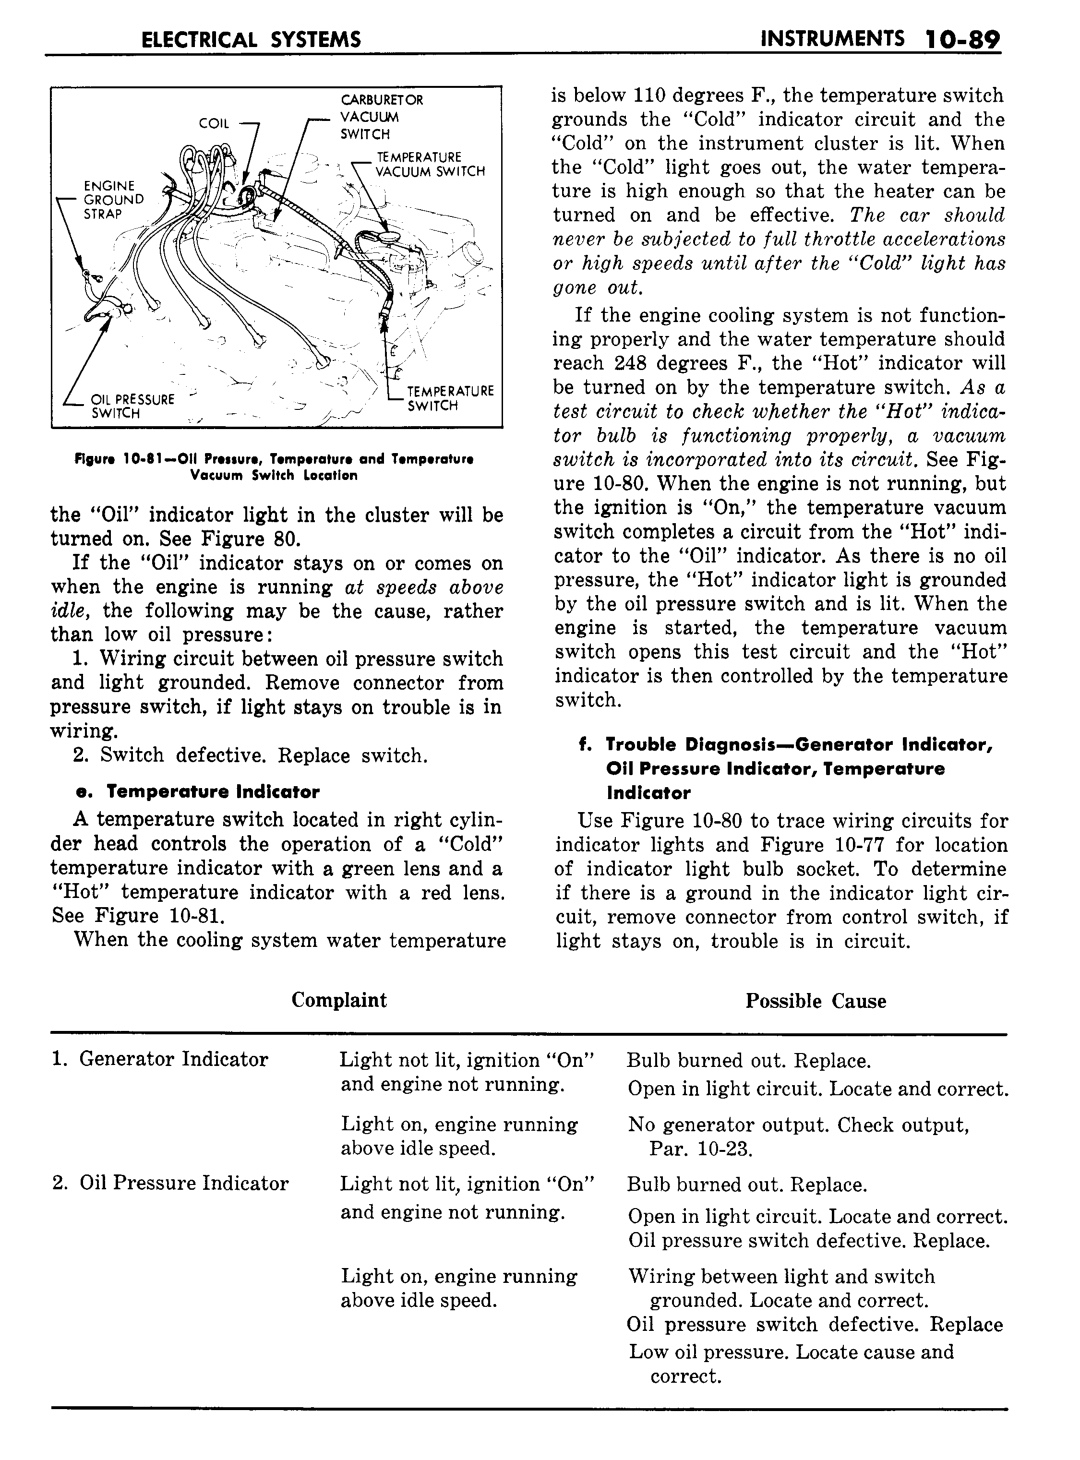 n_11 1960 Buick Shop Manual - Electrical Systems-089-089.jpg